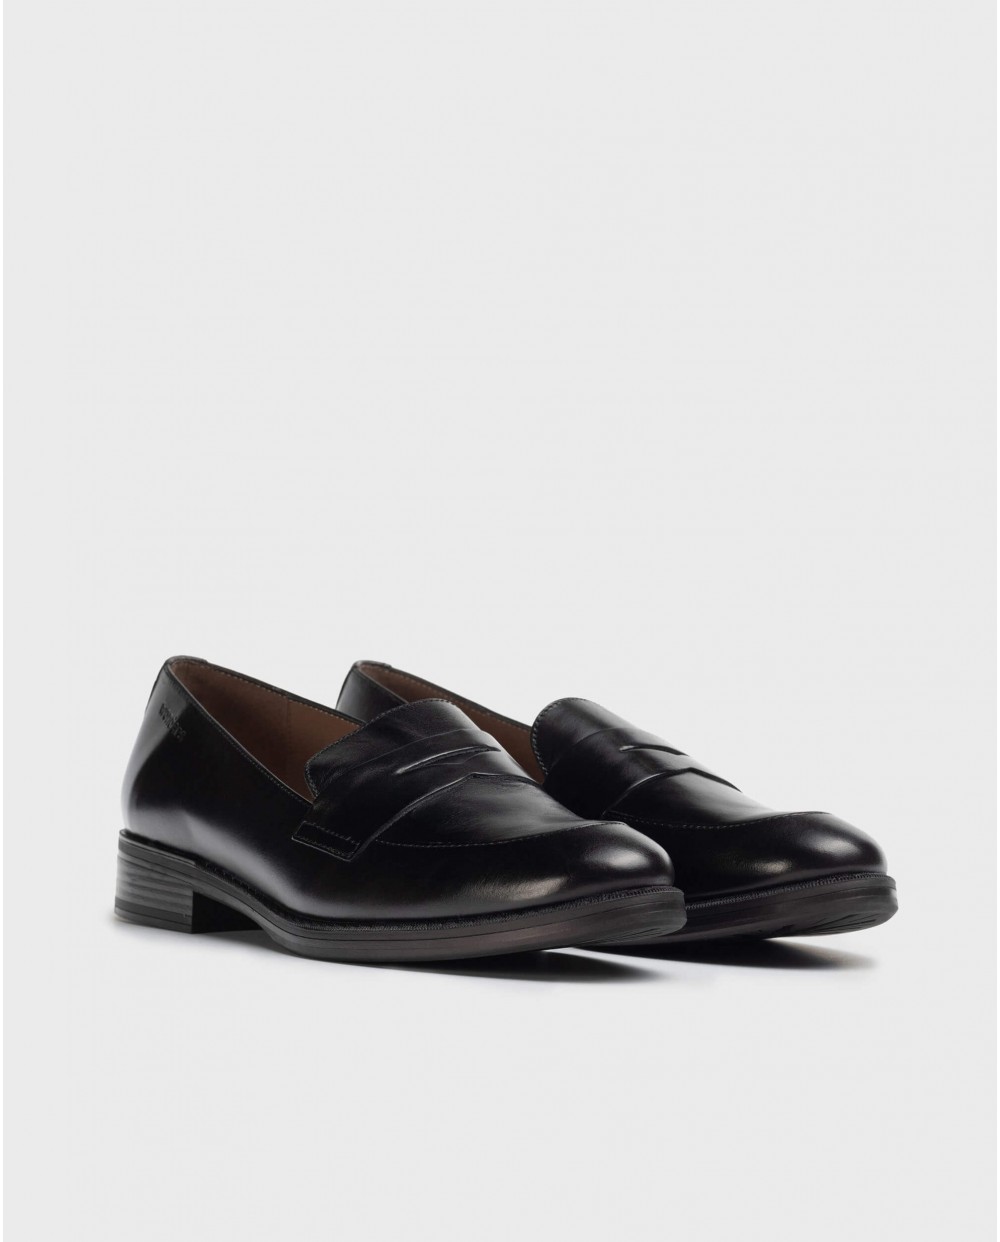 Wonders-Flat Shoes-Black leather moccasin